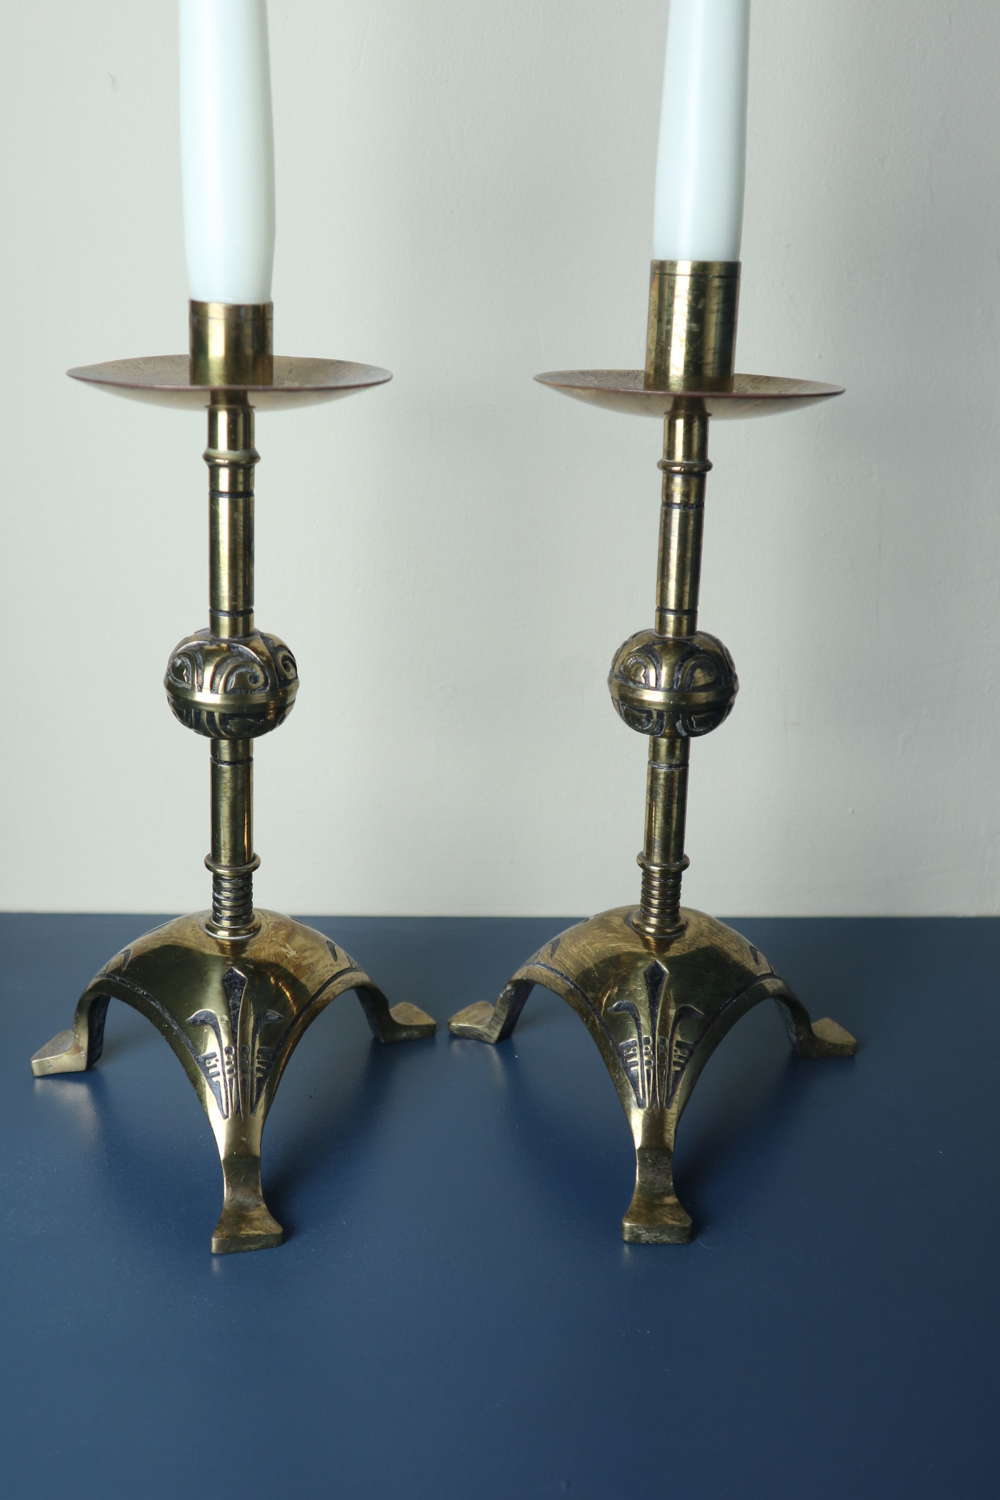 Pair of Hart, Son, Peard & Co, Gothic Revival Candlesticks c.1877